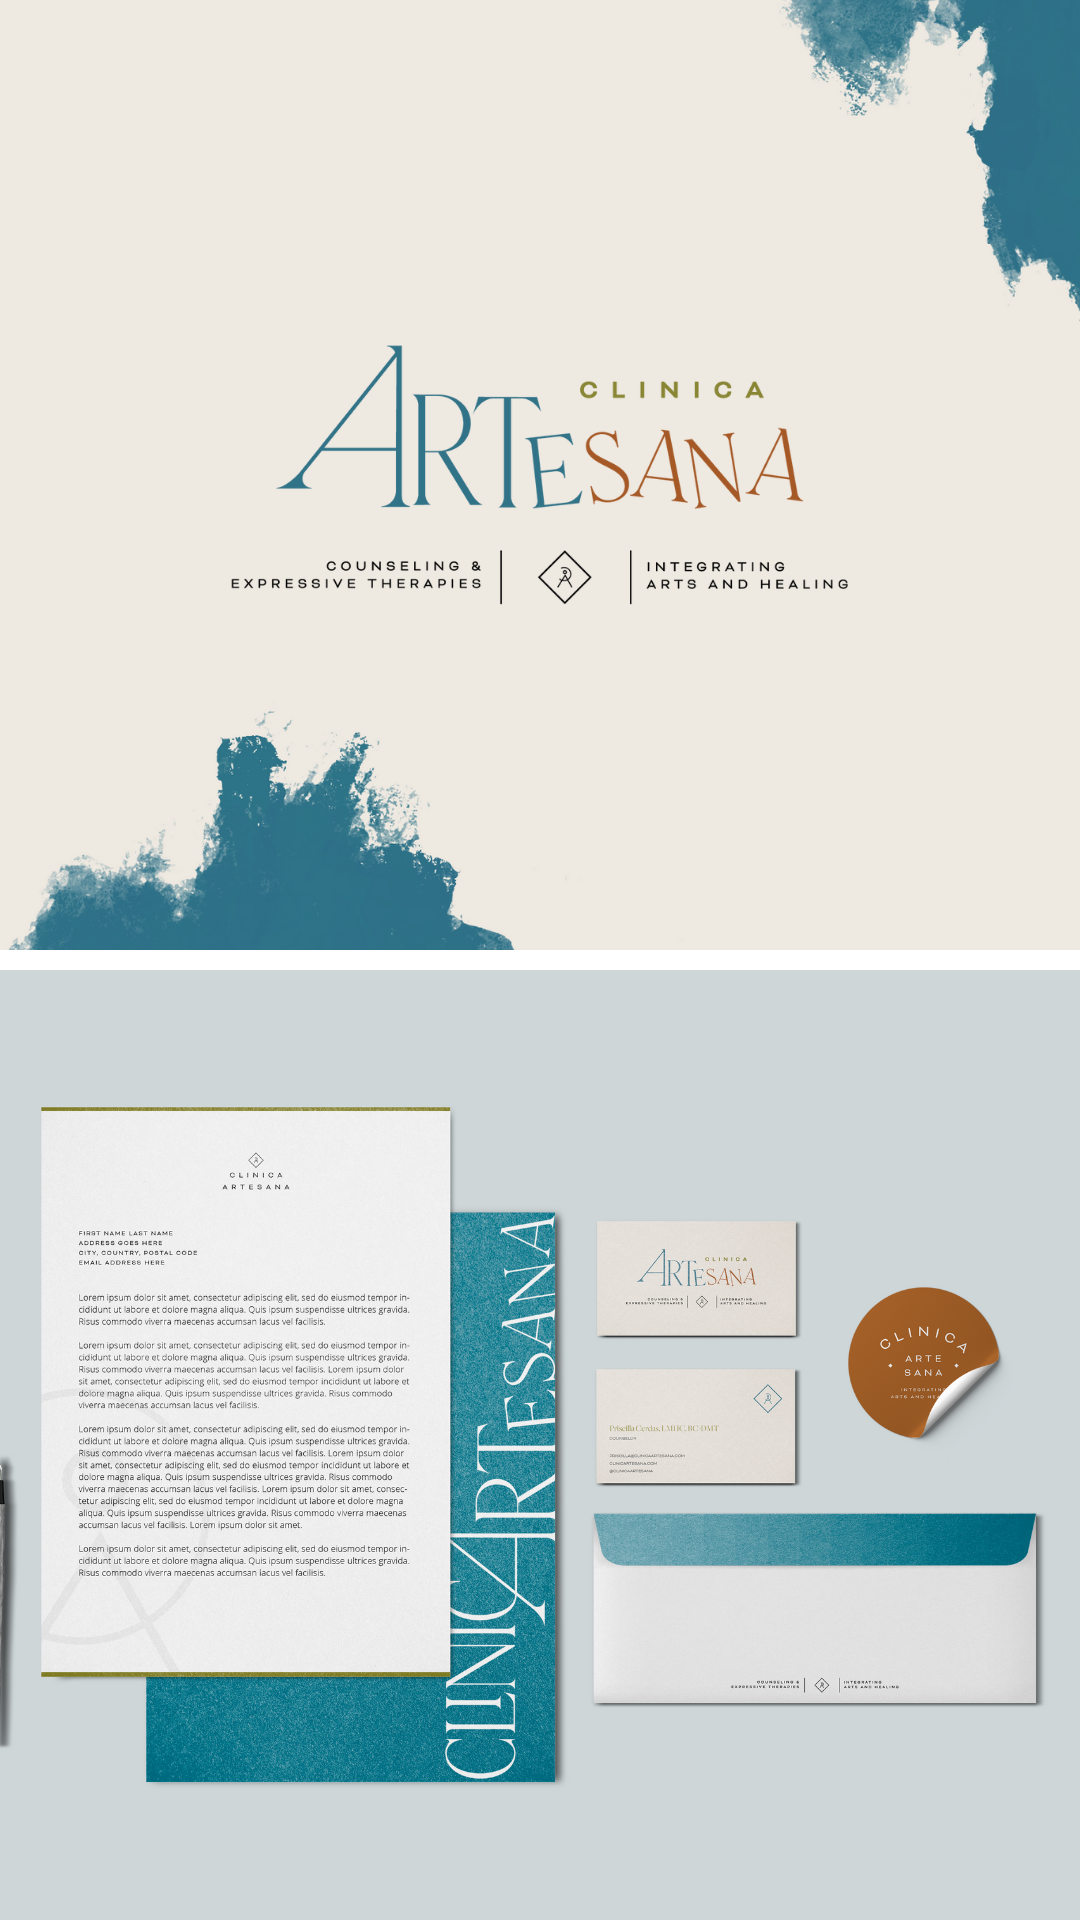 Primary logo for Clinica Artesana as well as a mockup of their letterhead and stationery